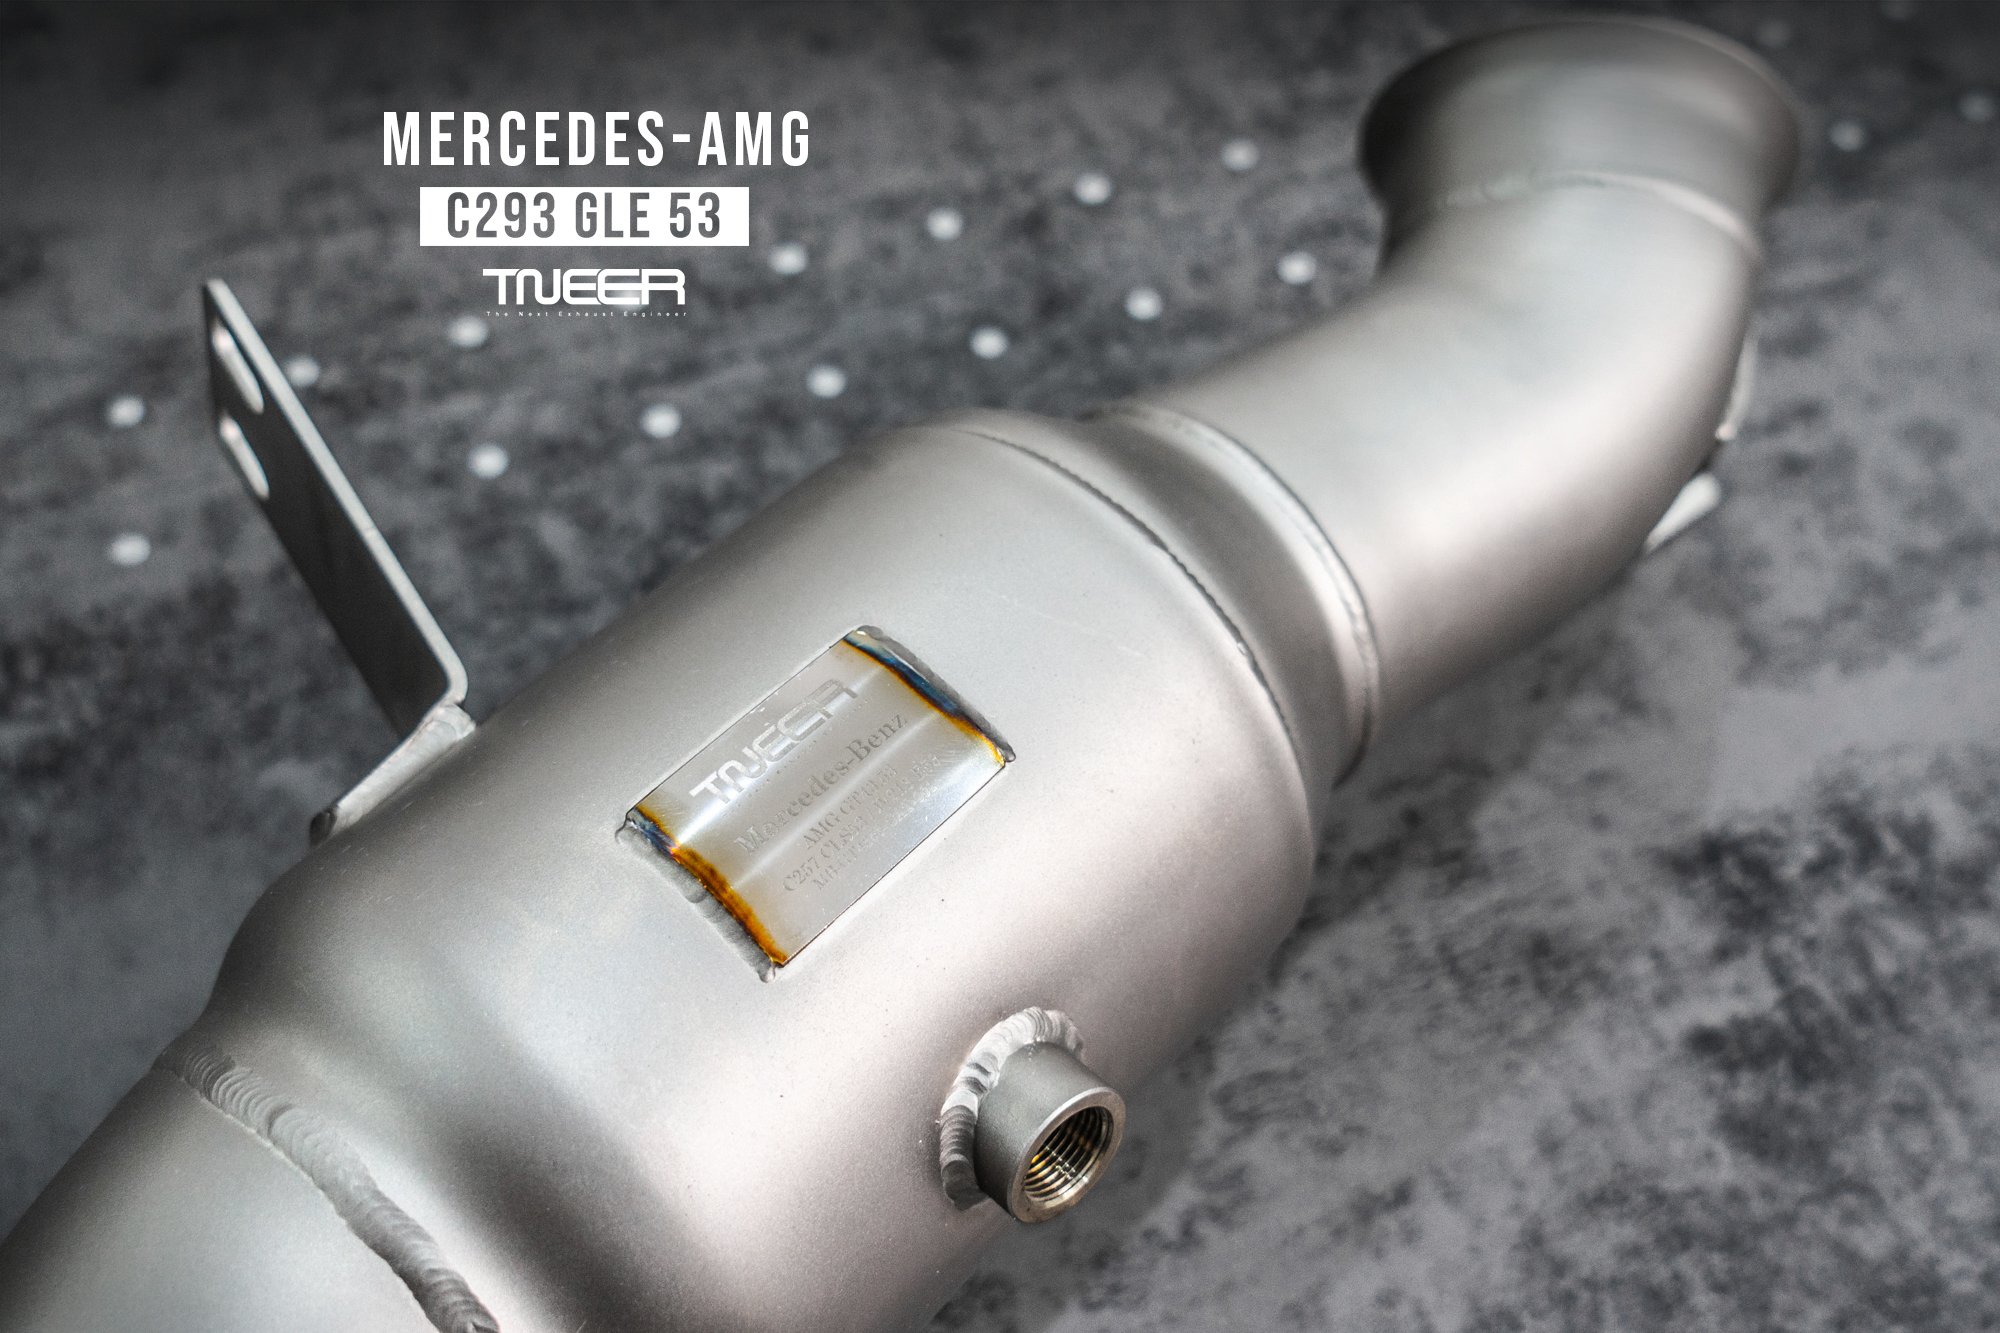 Mercedes-AMG C293 GLE53 TNEER Performance Exhaust System